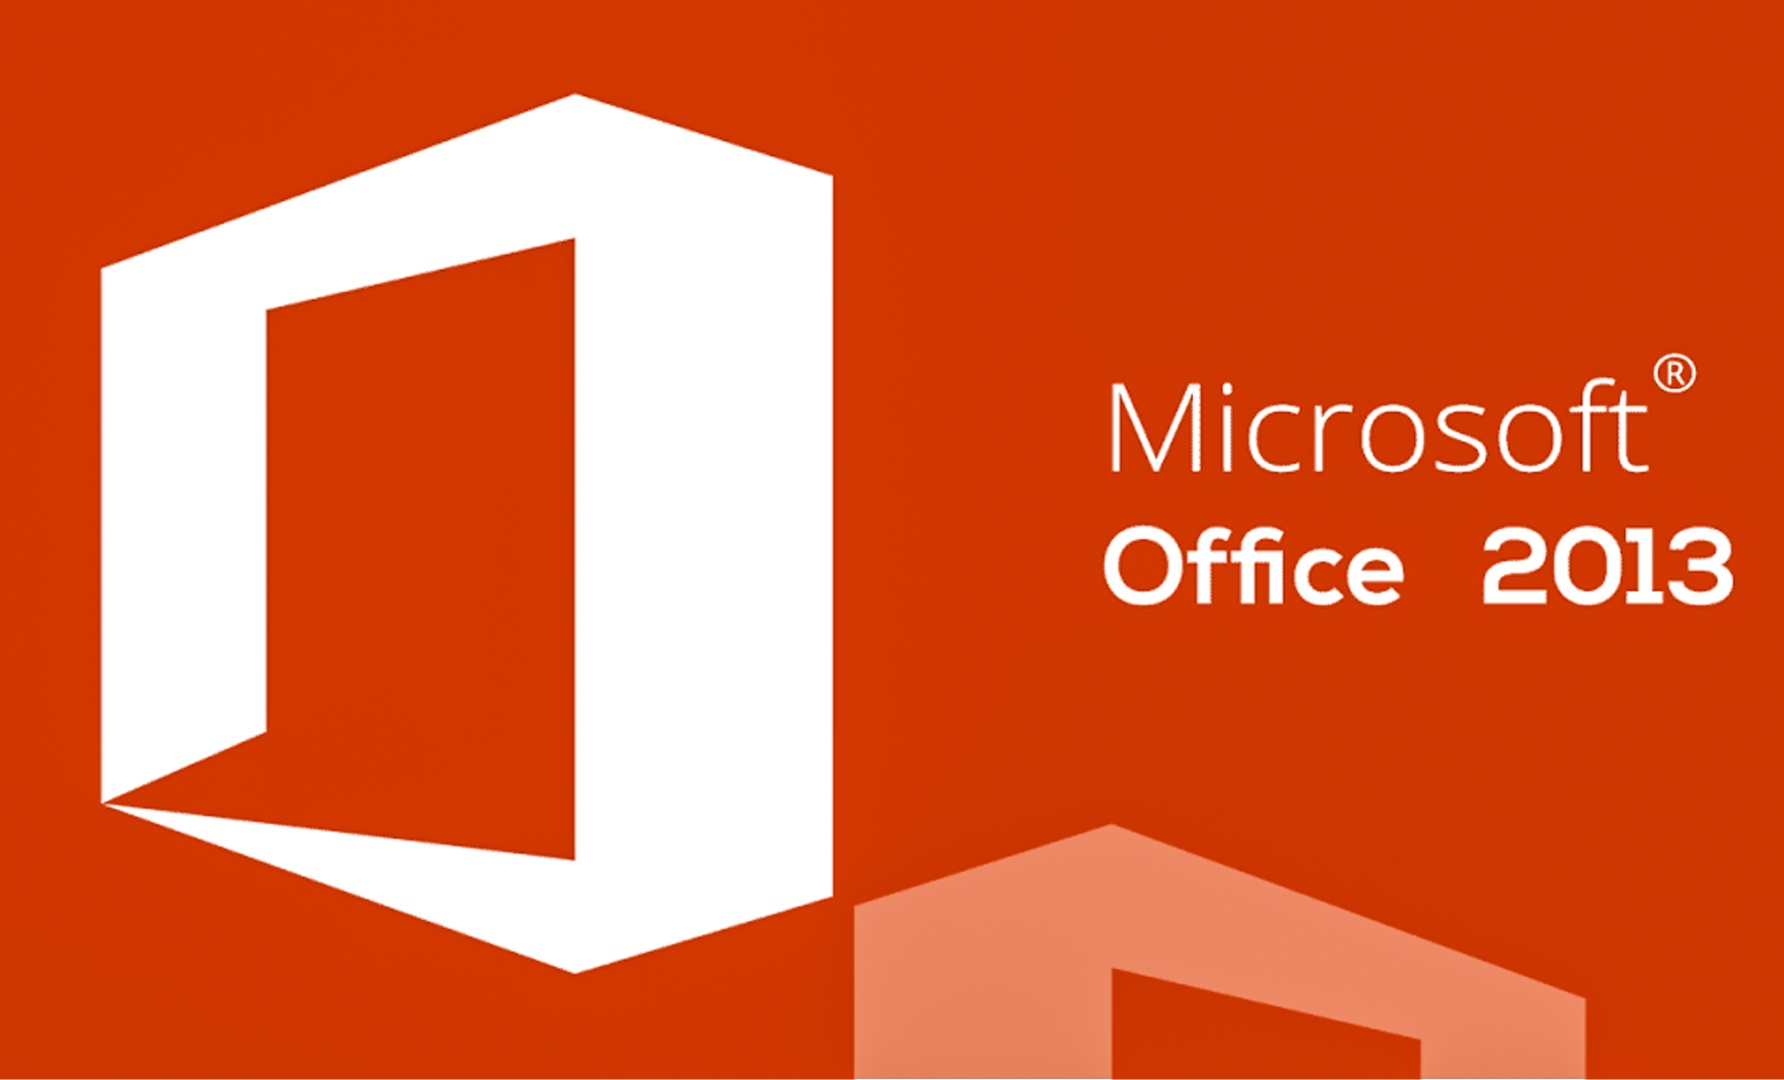 Microsoft Office 2013 support will be discontinued in April next year ￼